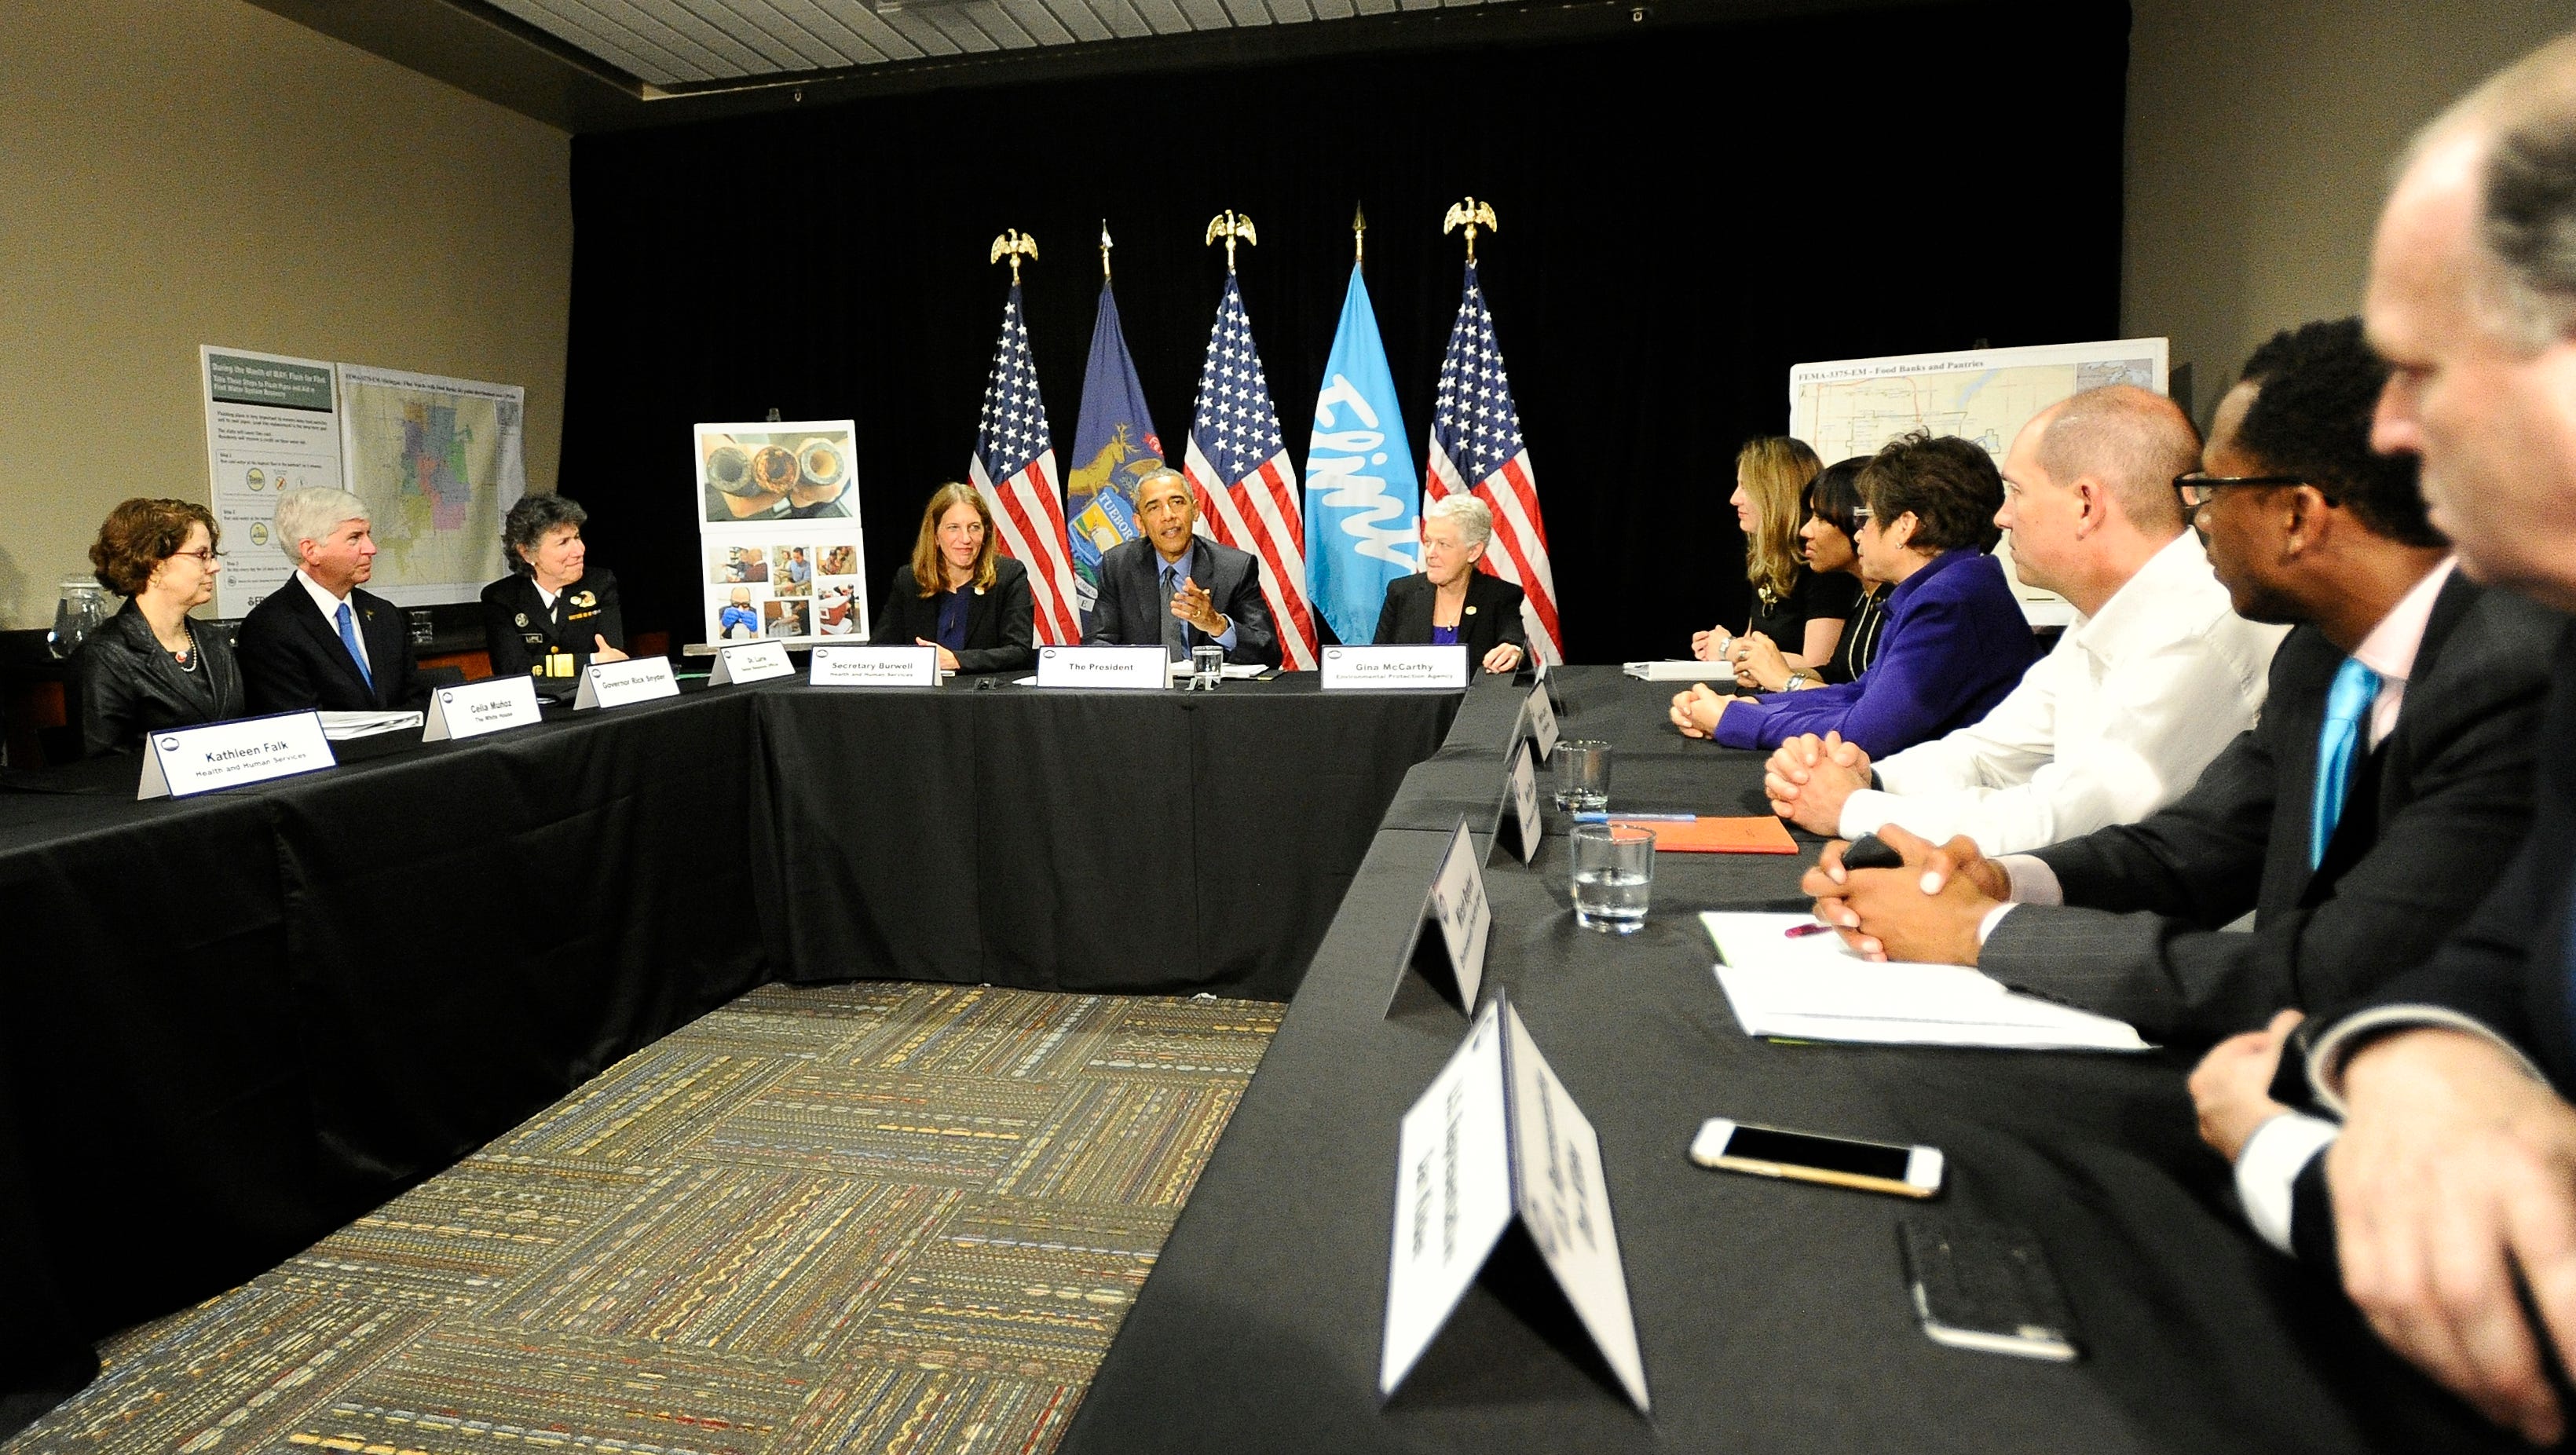 President Barack Obama with Sylvia Burwell, Secretary of Health and Human Services, left, and Gina McCarthy, Administrator of the Environmental Protection Agency, right, and other Federal officials during a meeting at the Food Bank of Eastern Michigan in Flint, Michigan on May 4, 2016.